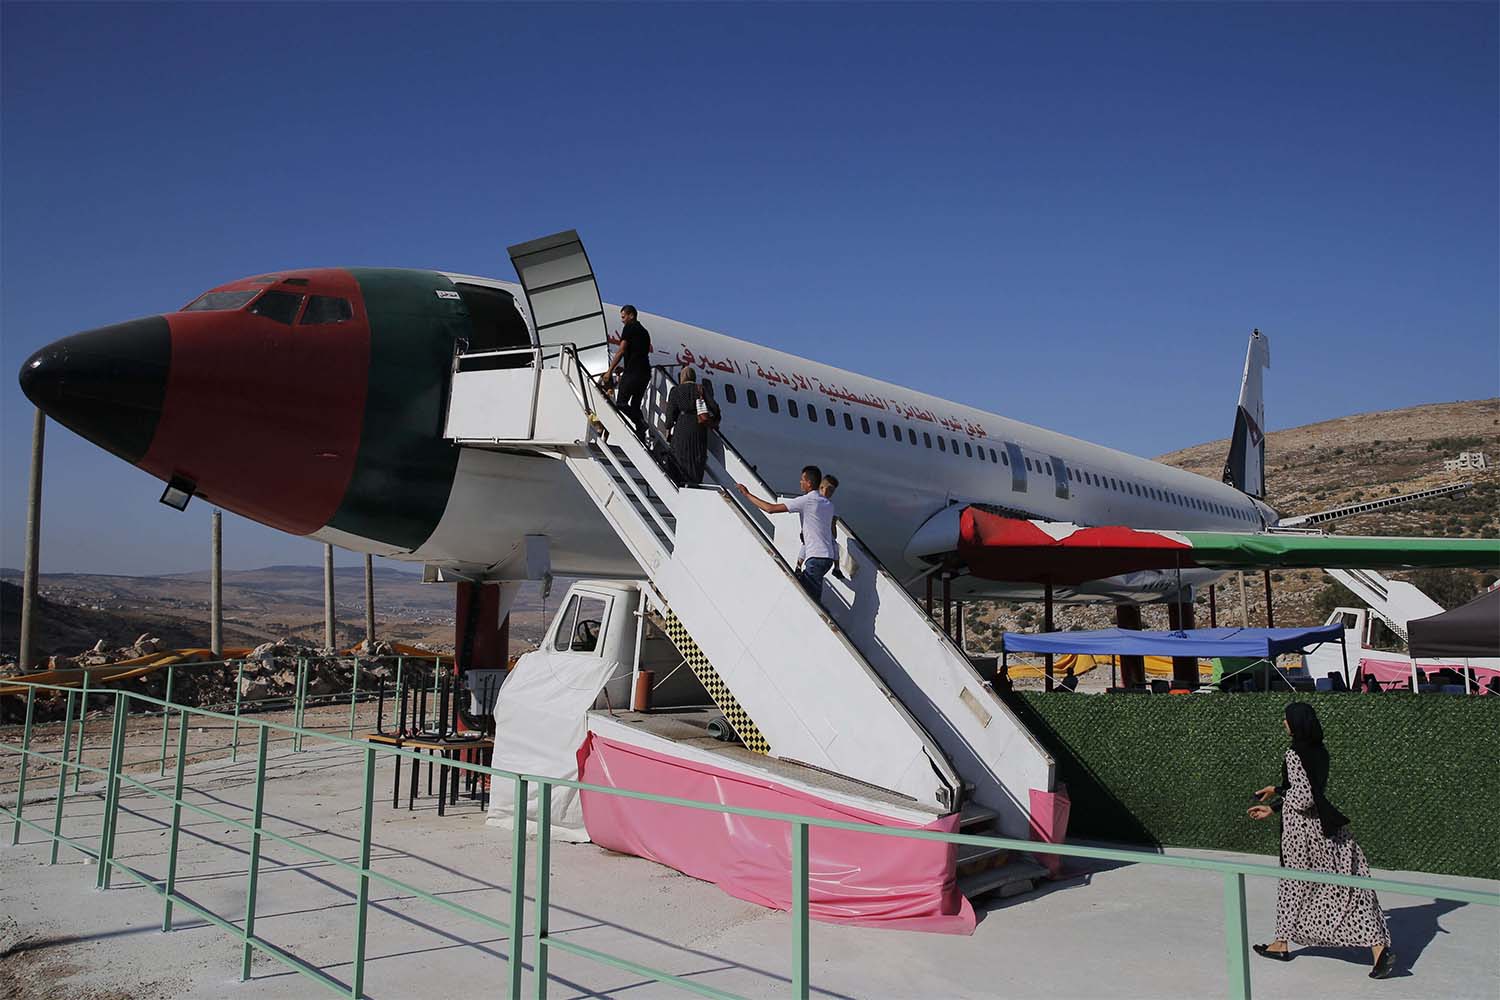 Many visitors come to take photos inside the plane at a price of five shekels (about $1.50) per person